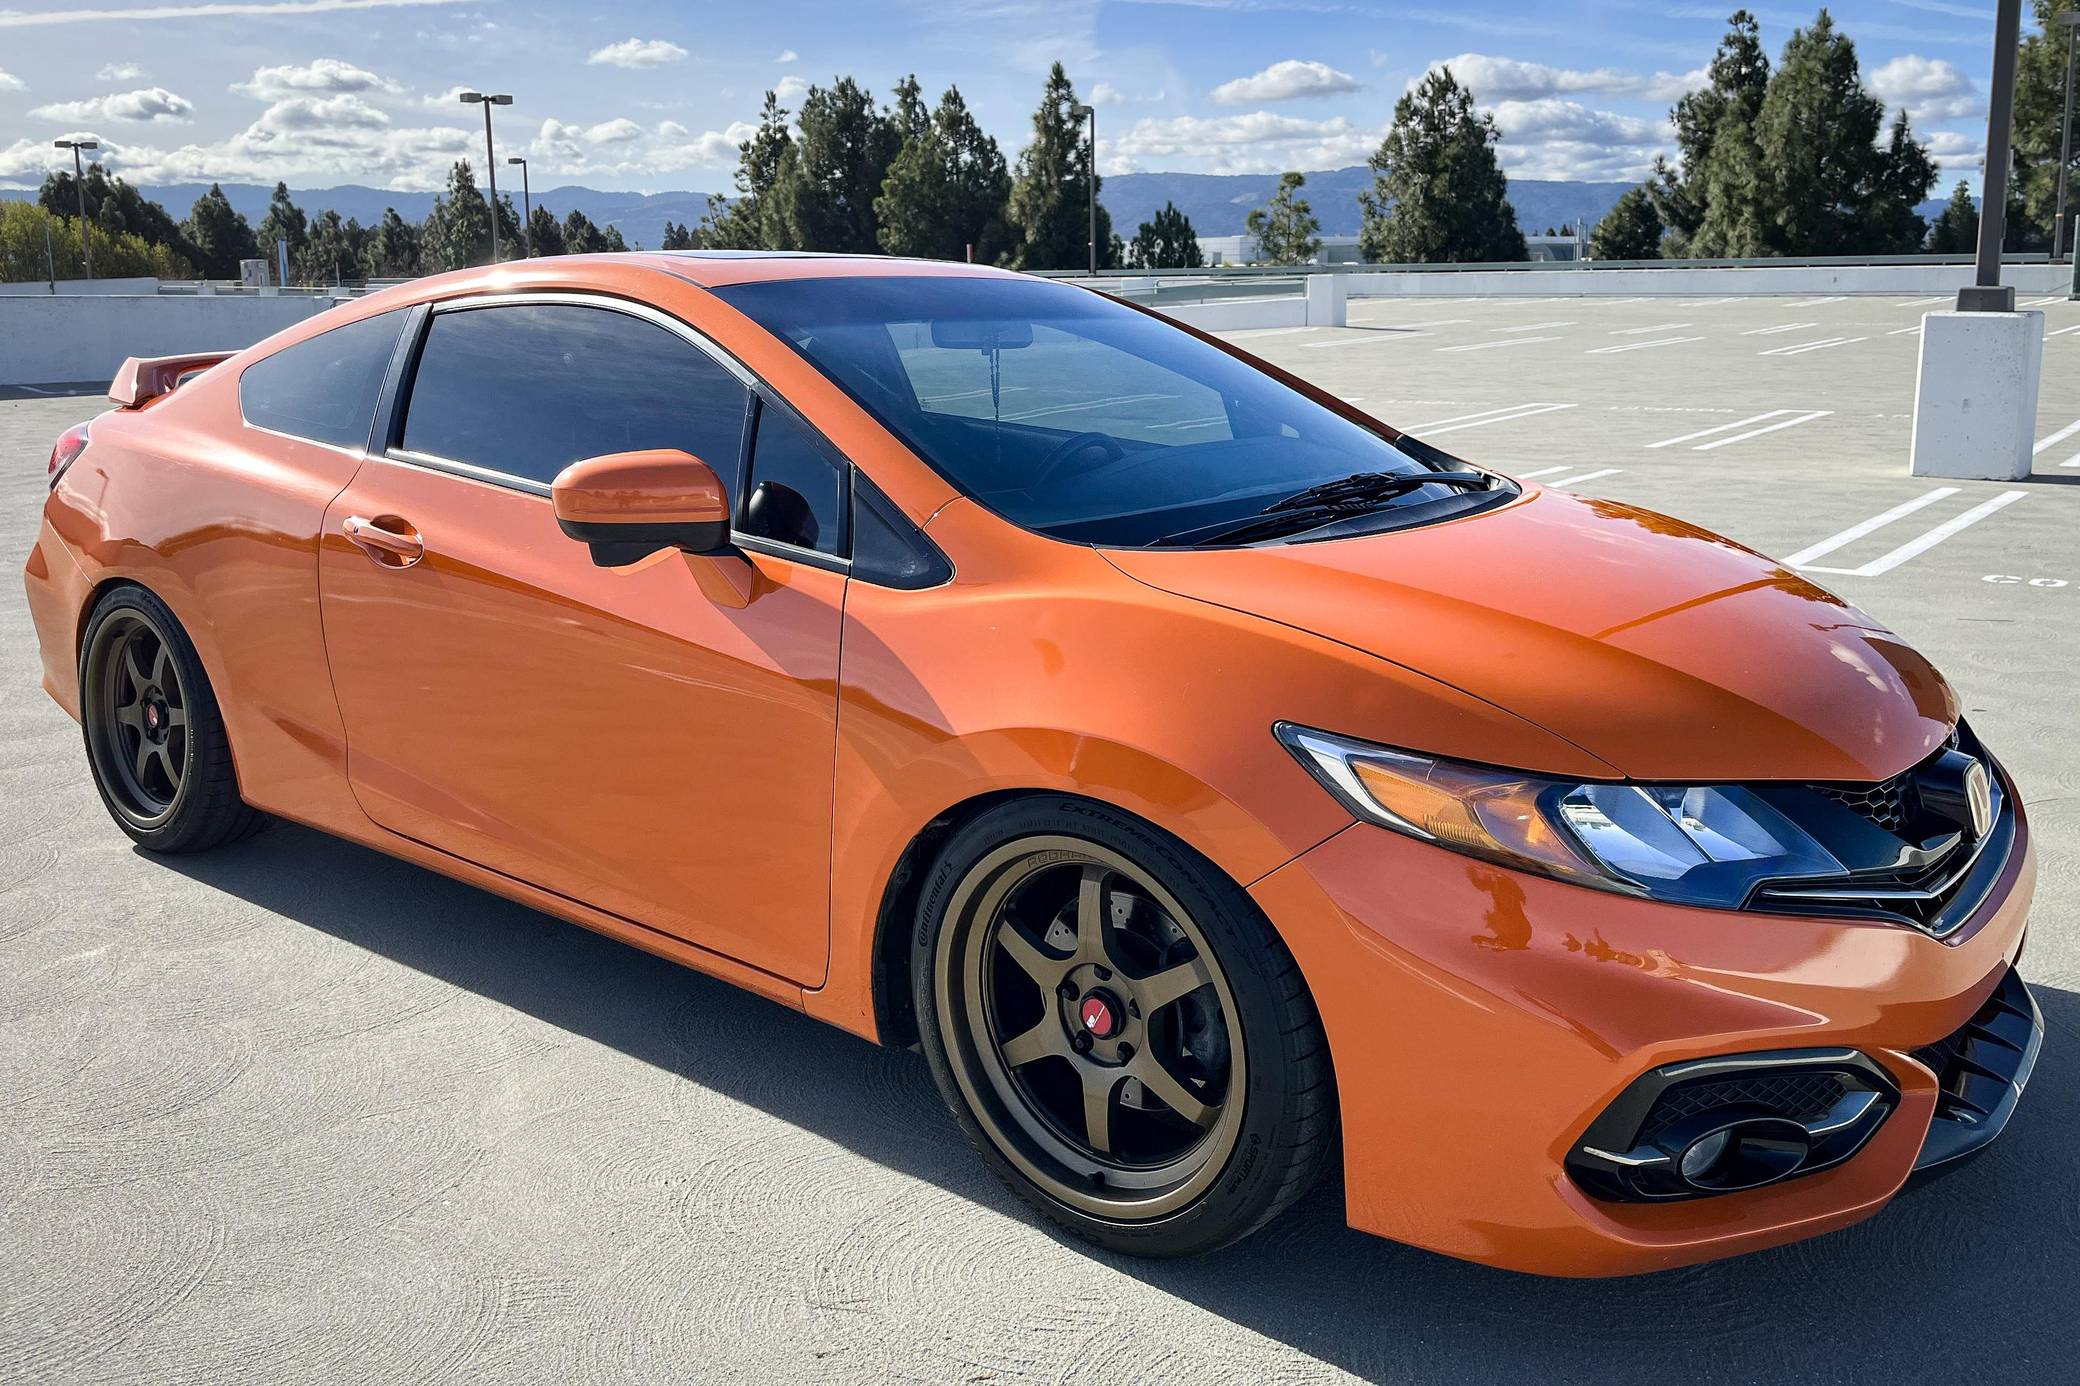 Honda Civic Si Coupe for Sale - & Bids